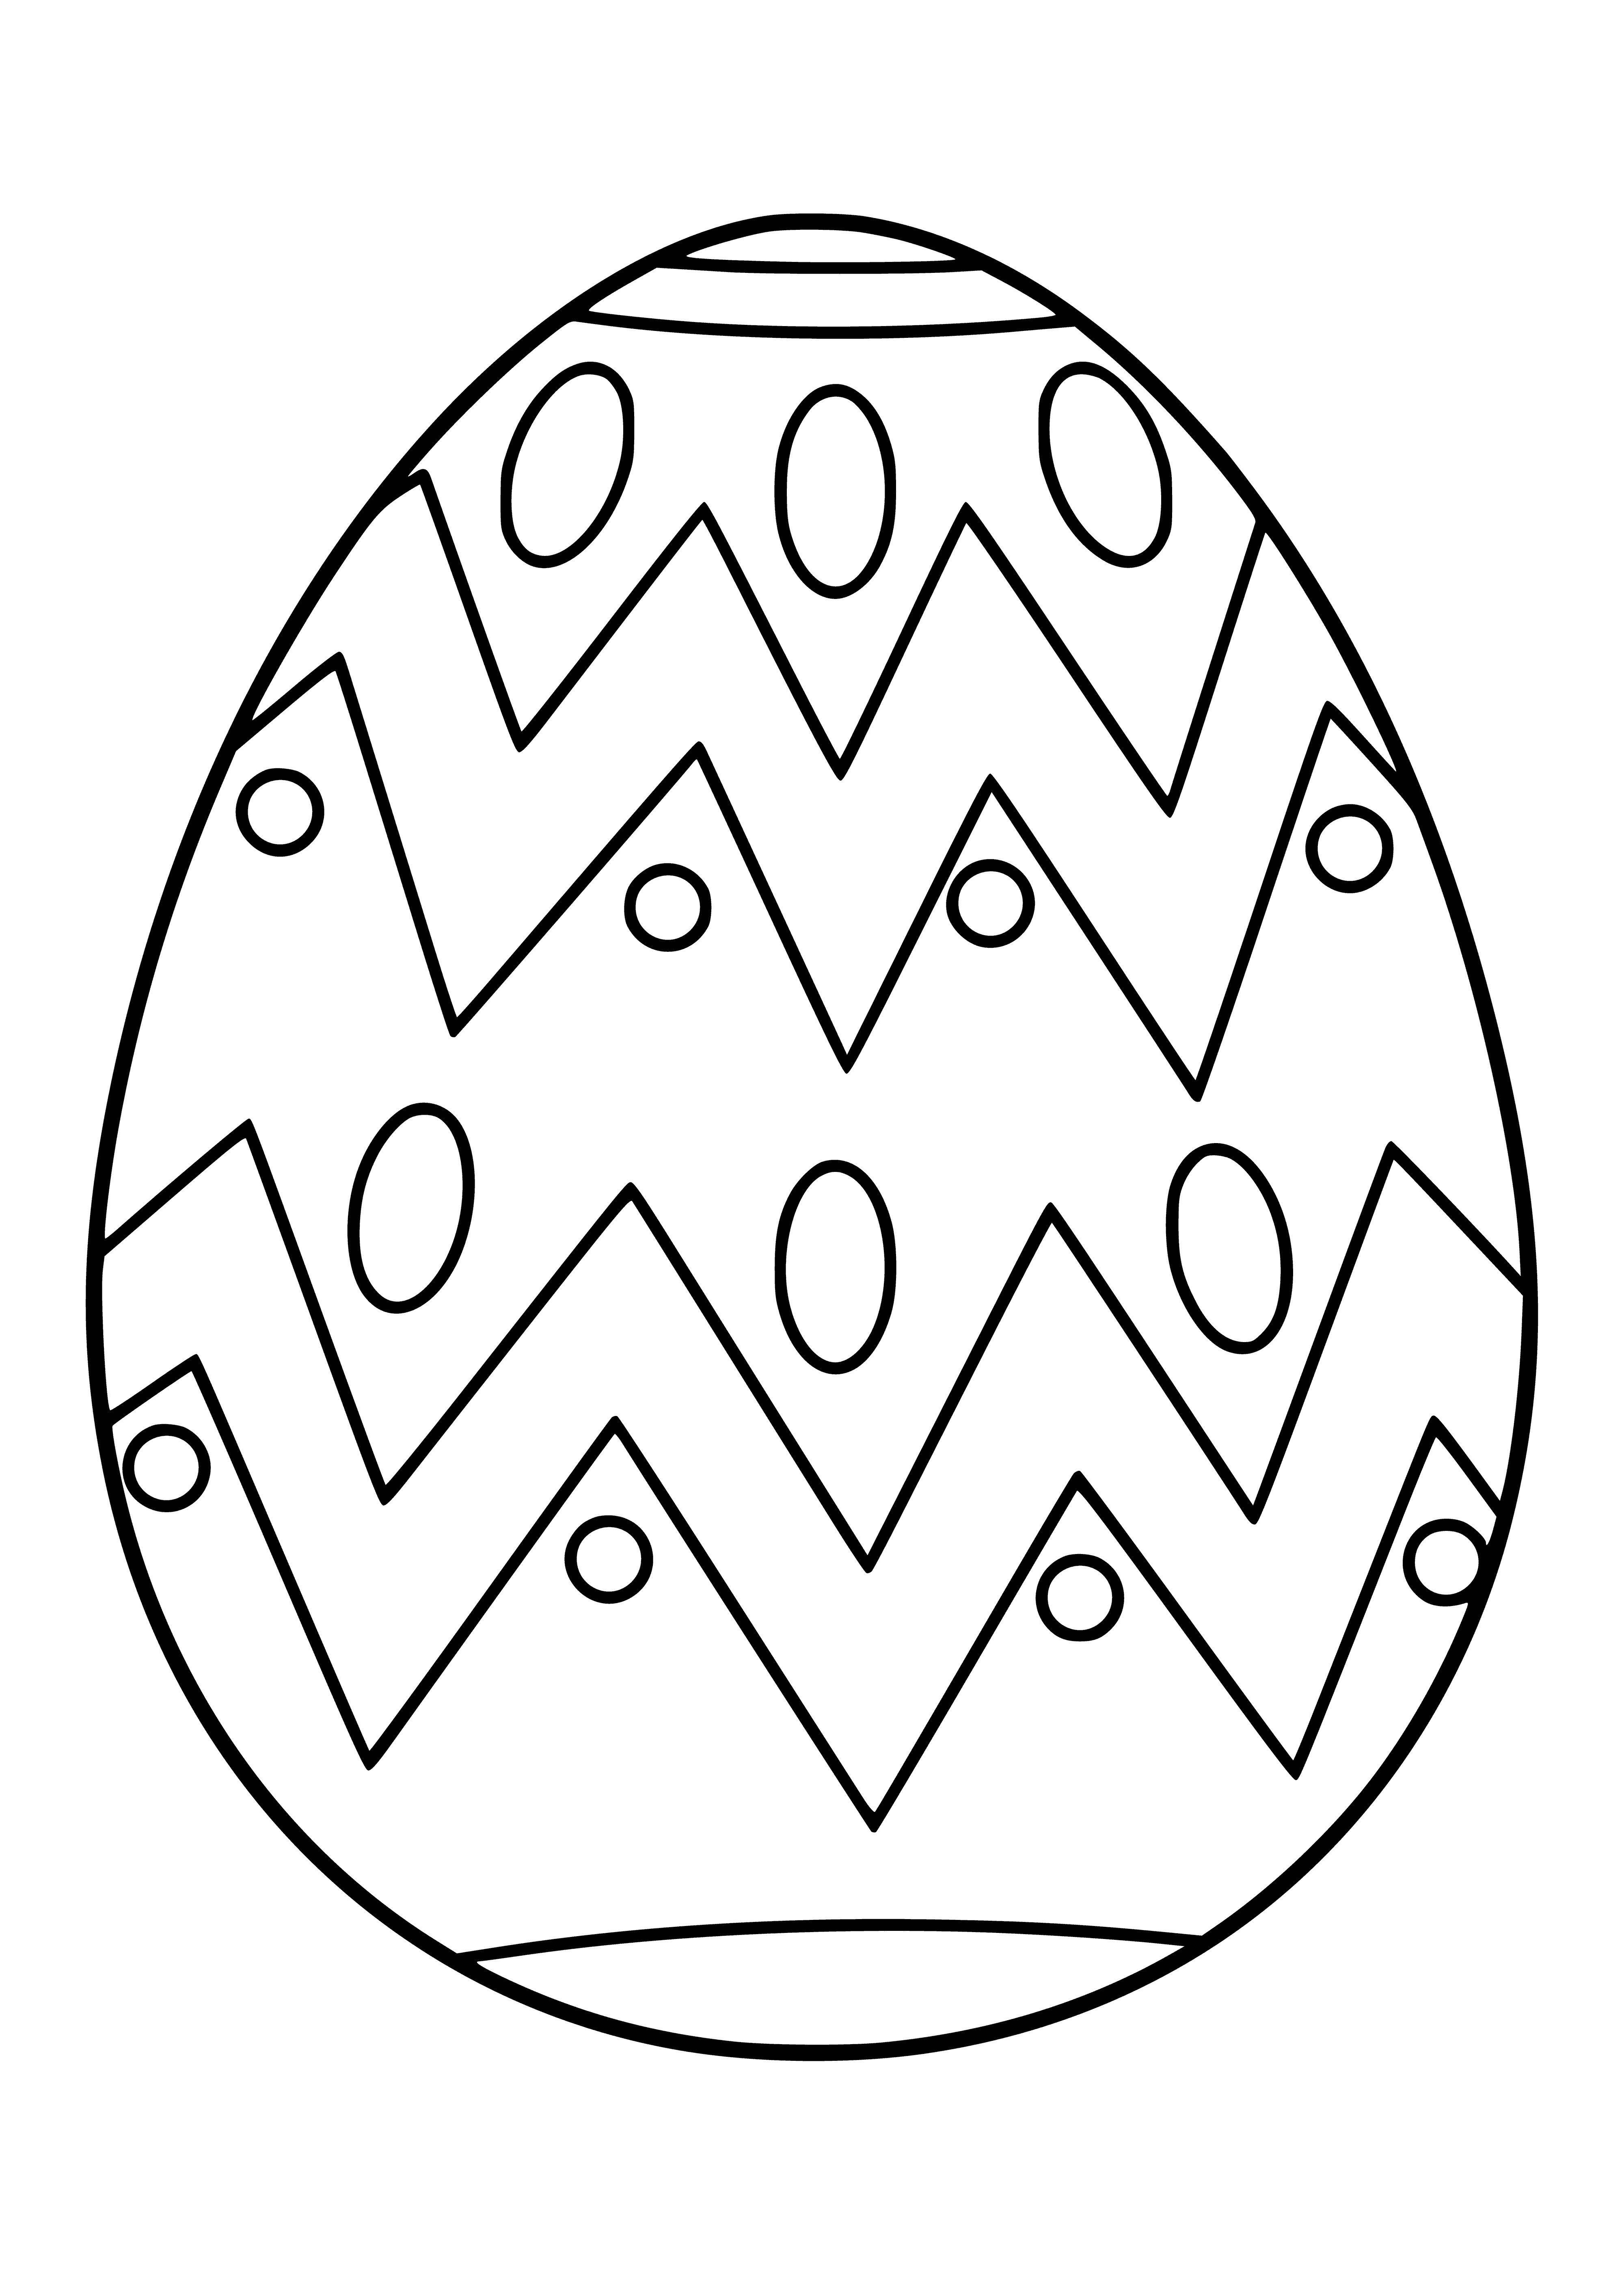 coloring page: Easter egg symbolizes new life, often given as a gift & linked to springtime.